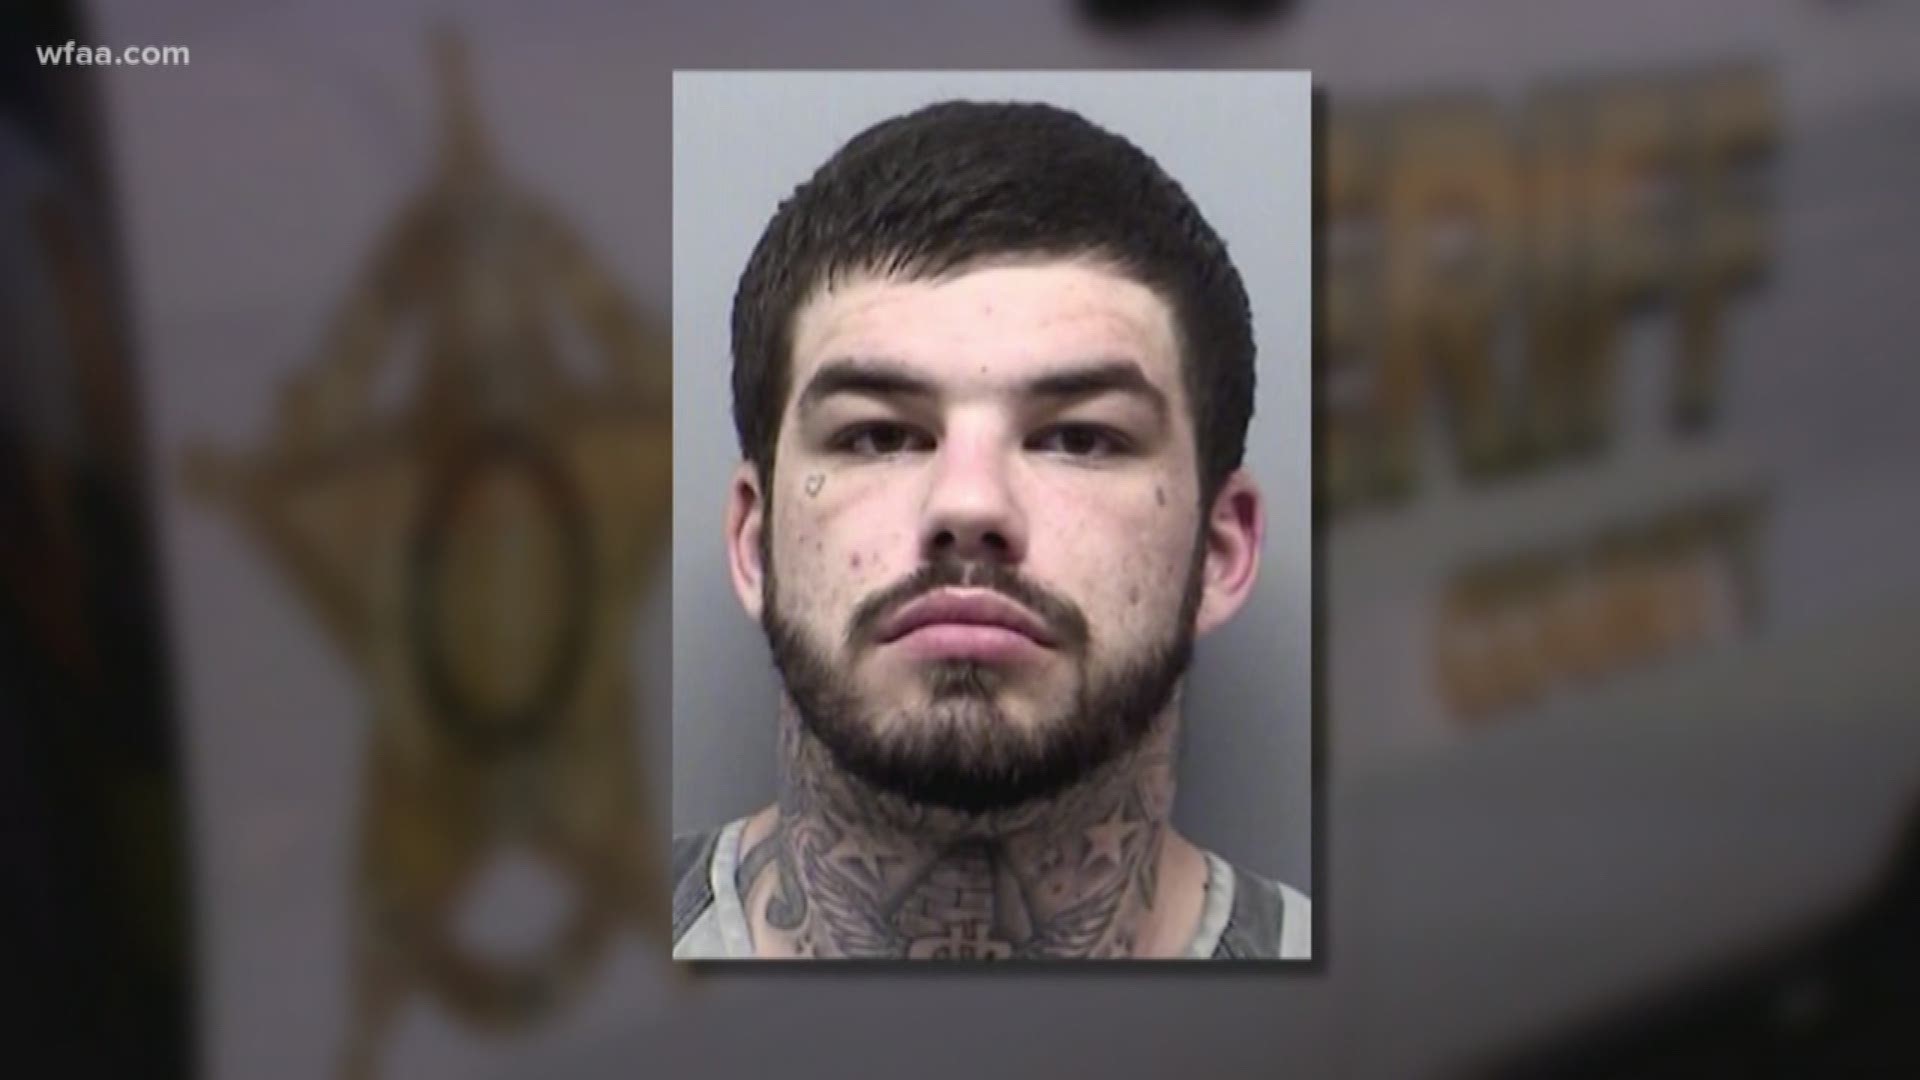 Police have arrested a 21-year-old man on a charge of murder in the death of a Ponder mother of two, according to Denton County authorities.